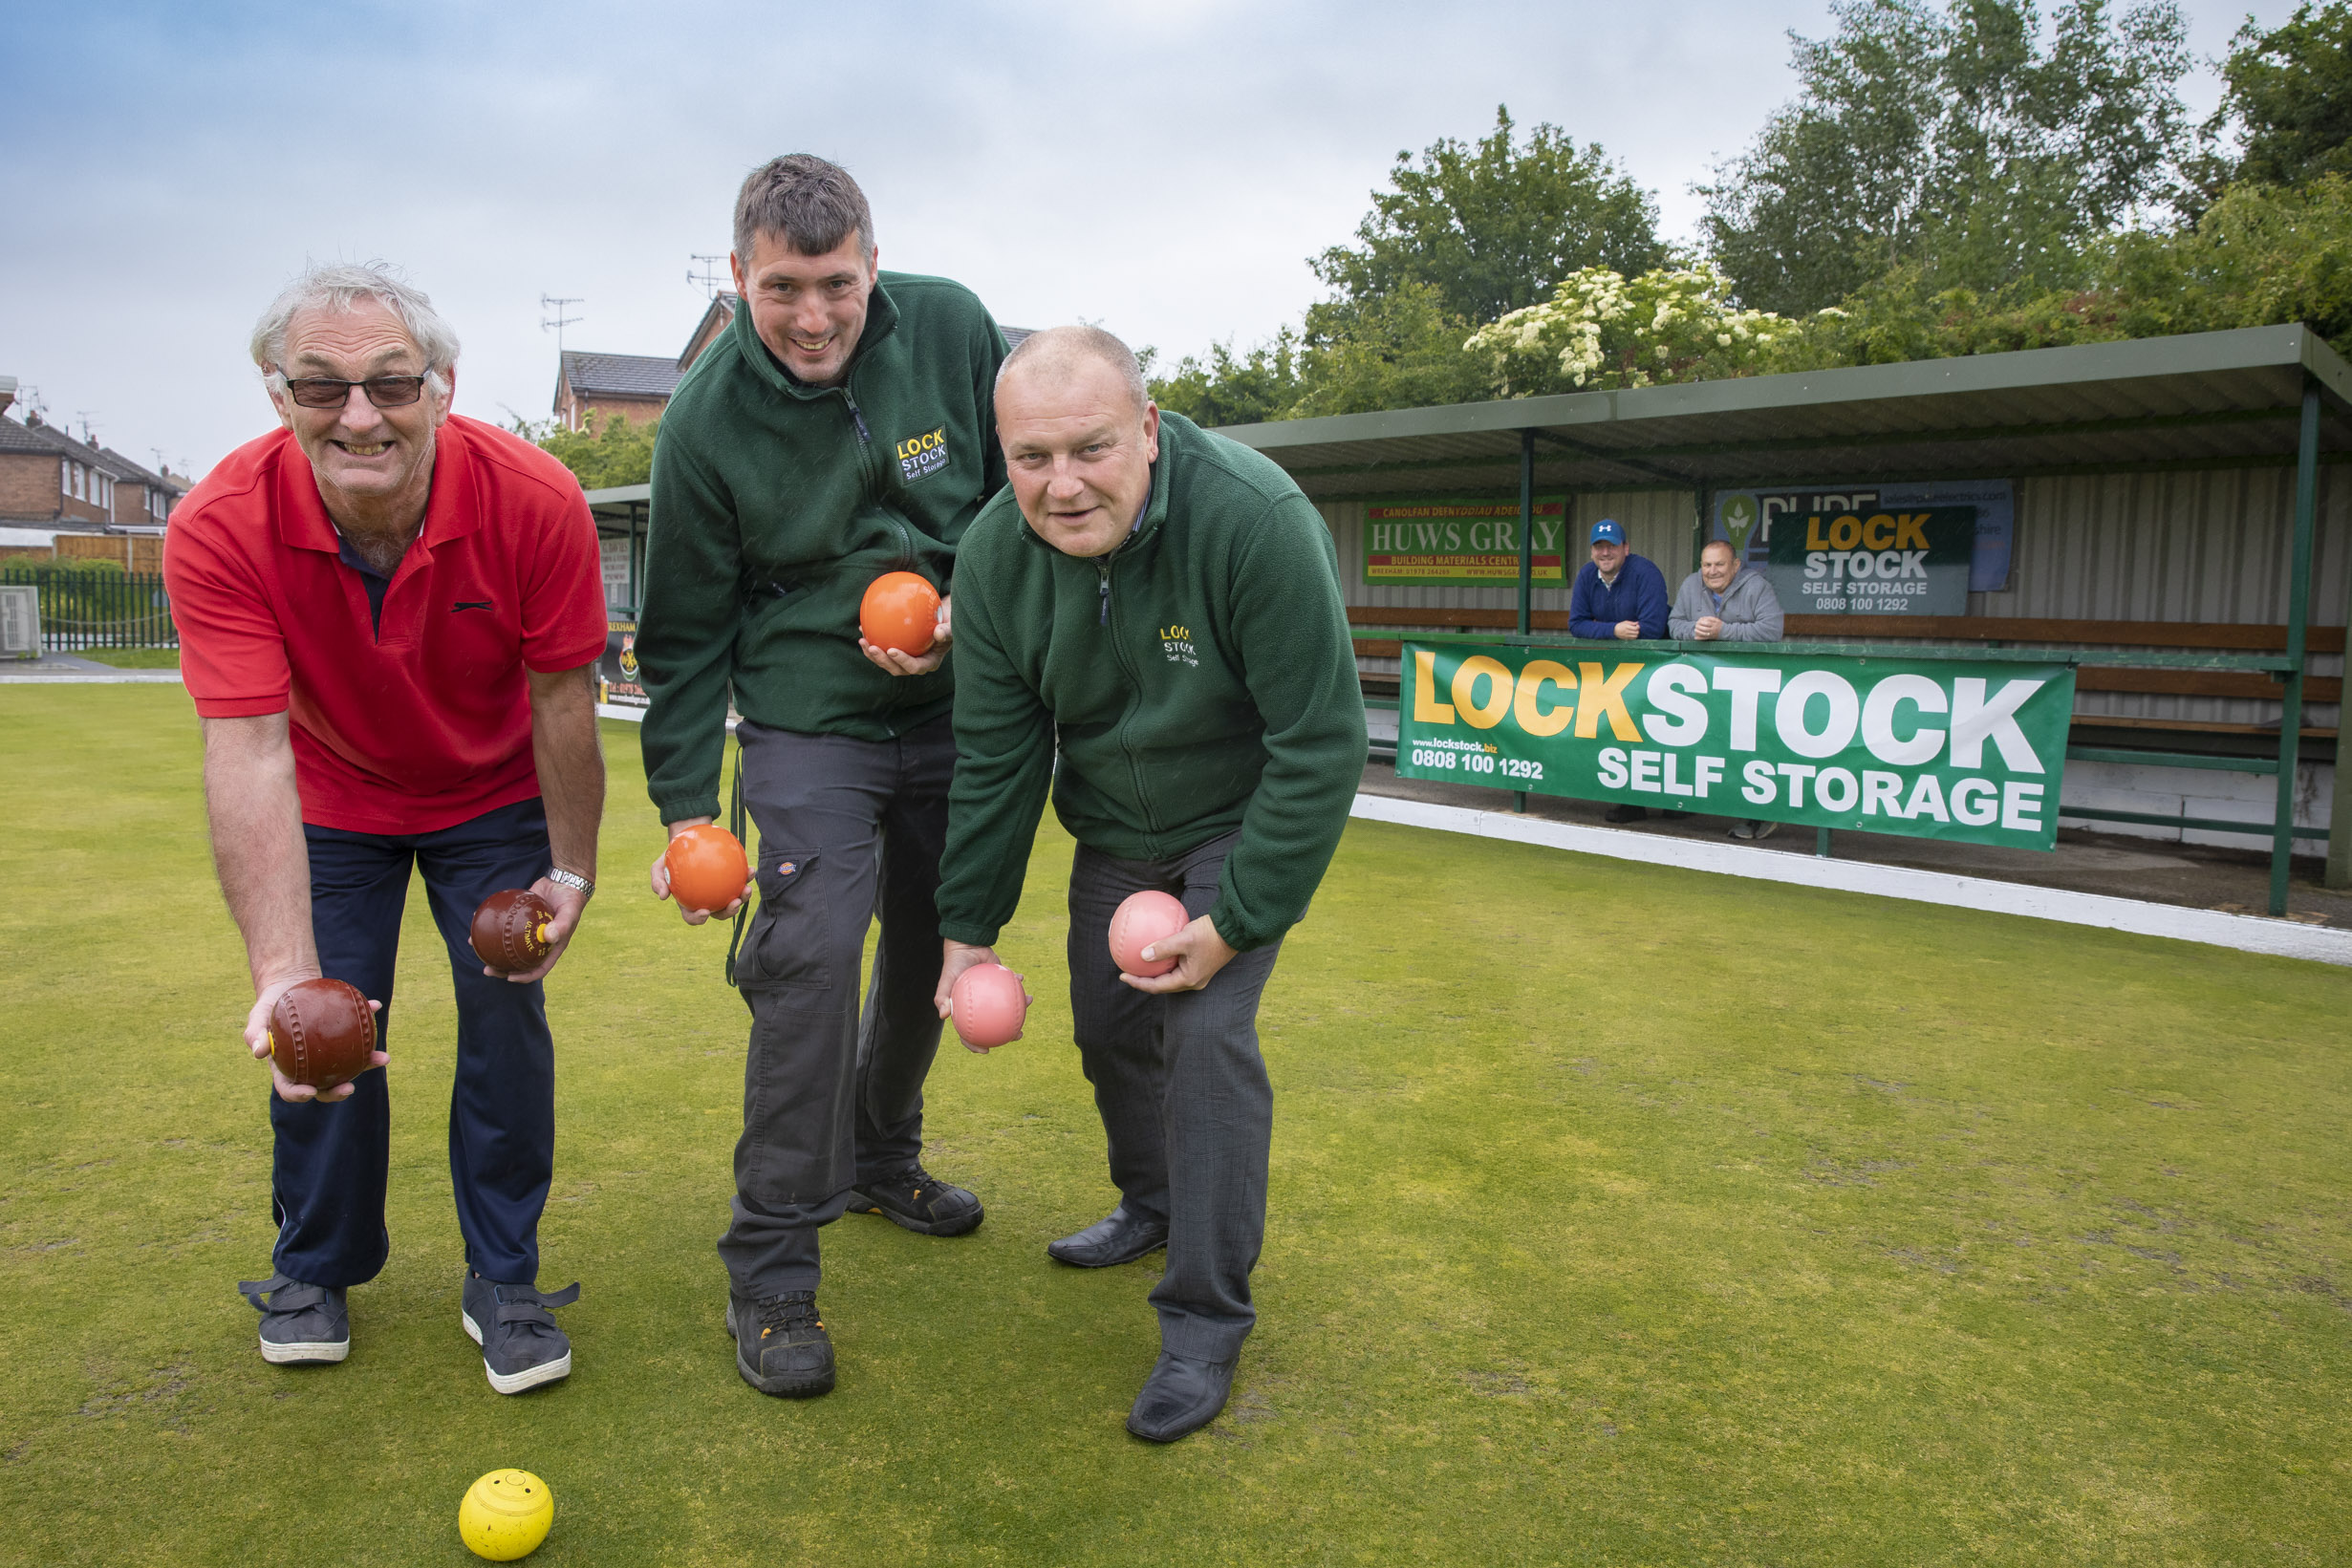 Green deal as Johnstown bowlers land sponsorship with top storage company